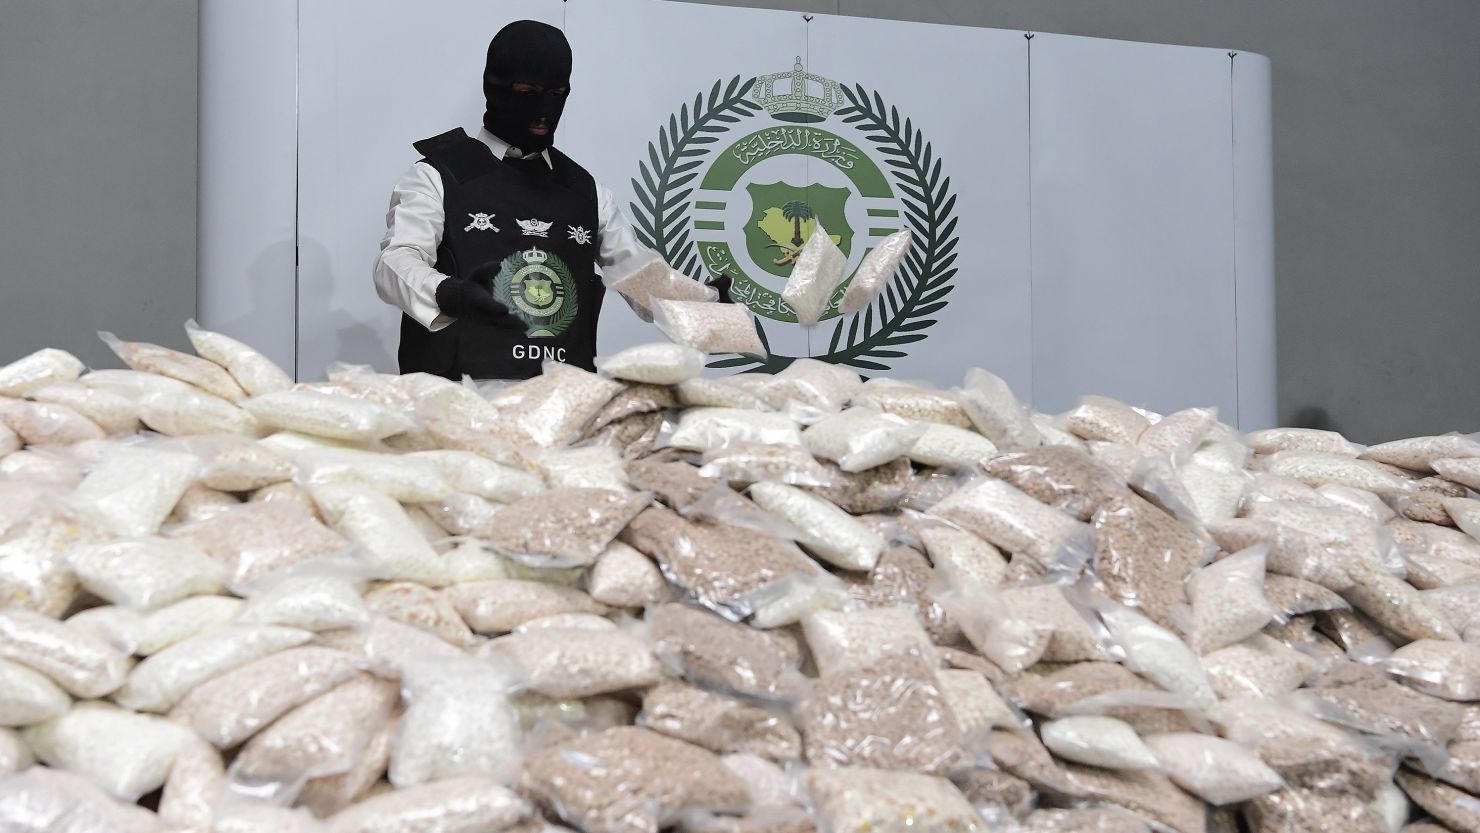 Forty-seven million amphetamine pills hidden in a flour shipment were seized by Saudi Arabia's authorities at a warehouse after arriving through the dry port of the capital Riyadh, the Saudi Ministry of Interior said in a statement on Wednesday.